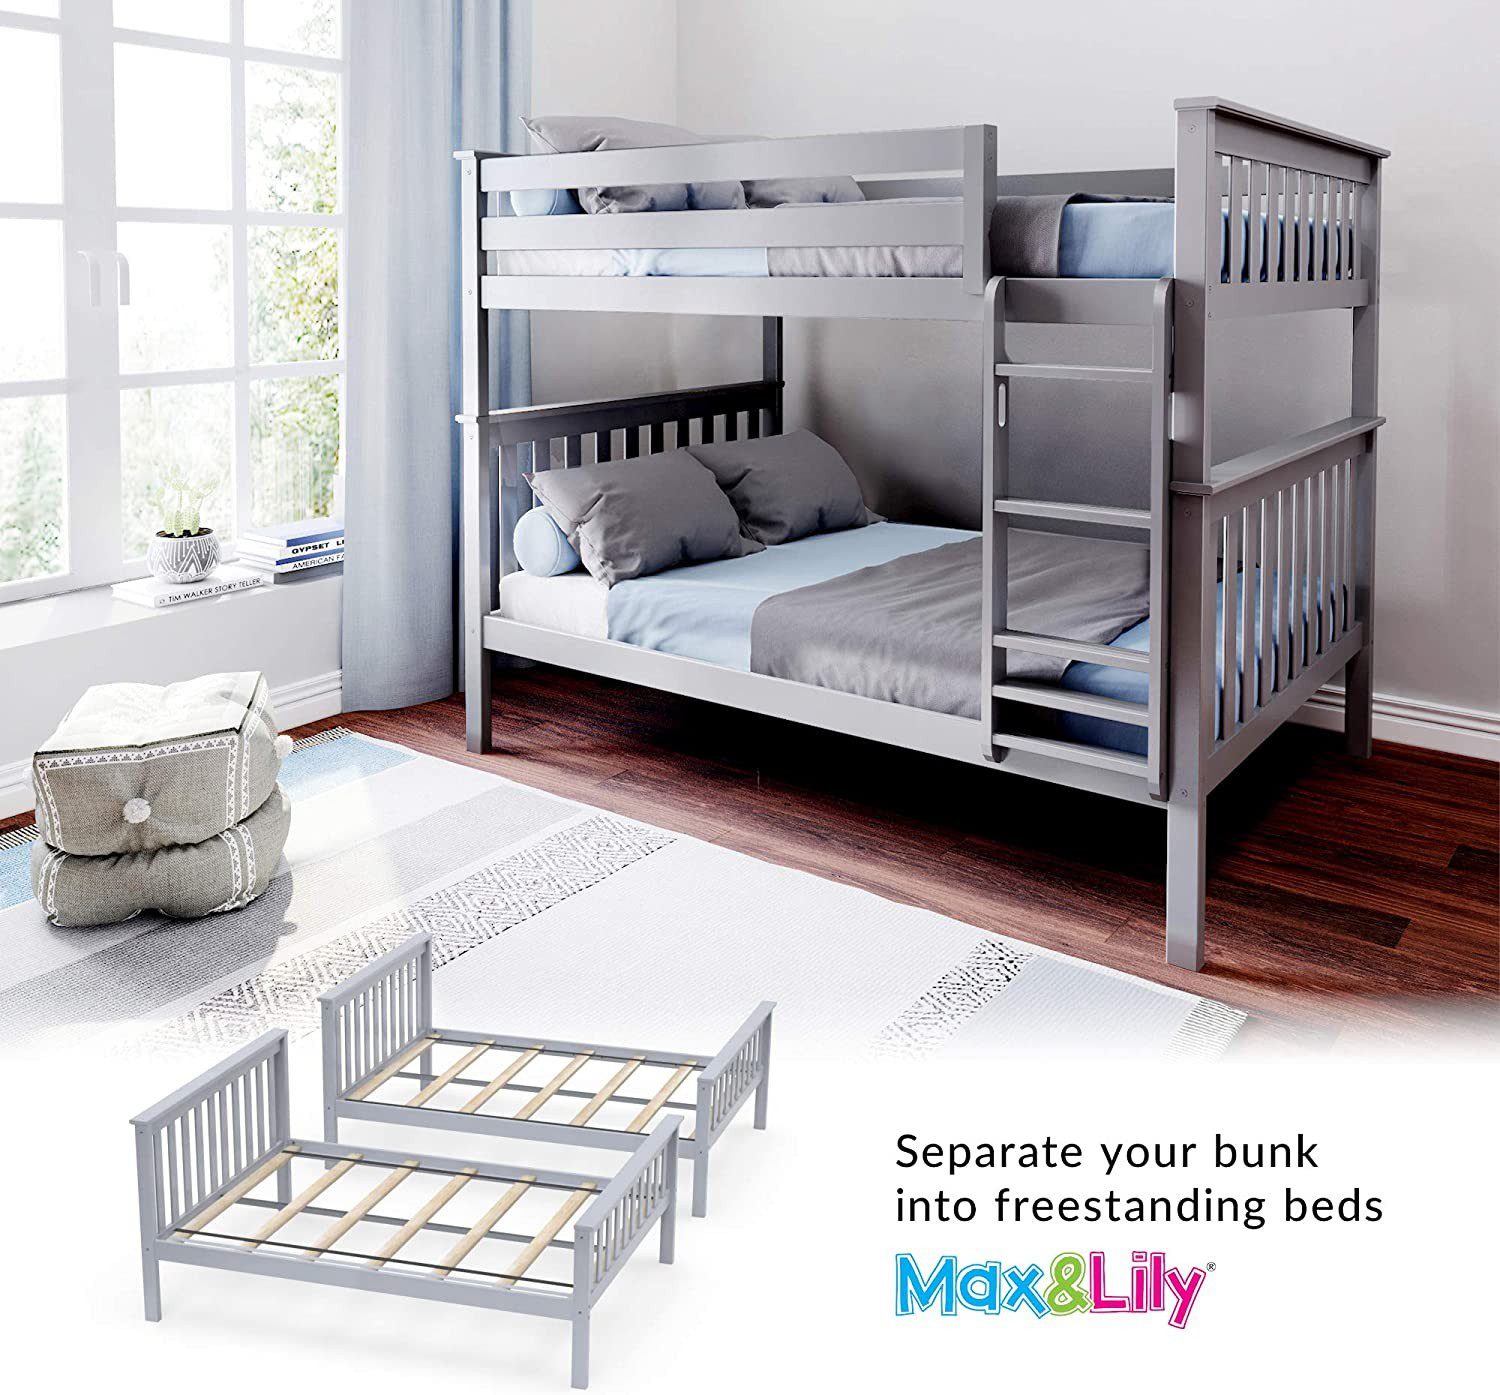 SOLID WOOD FULL OVER FULL BUNK BED IN GREY FINISH